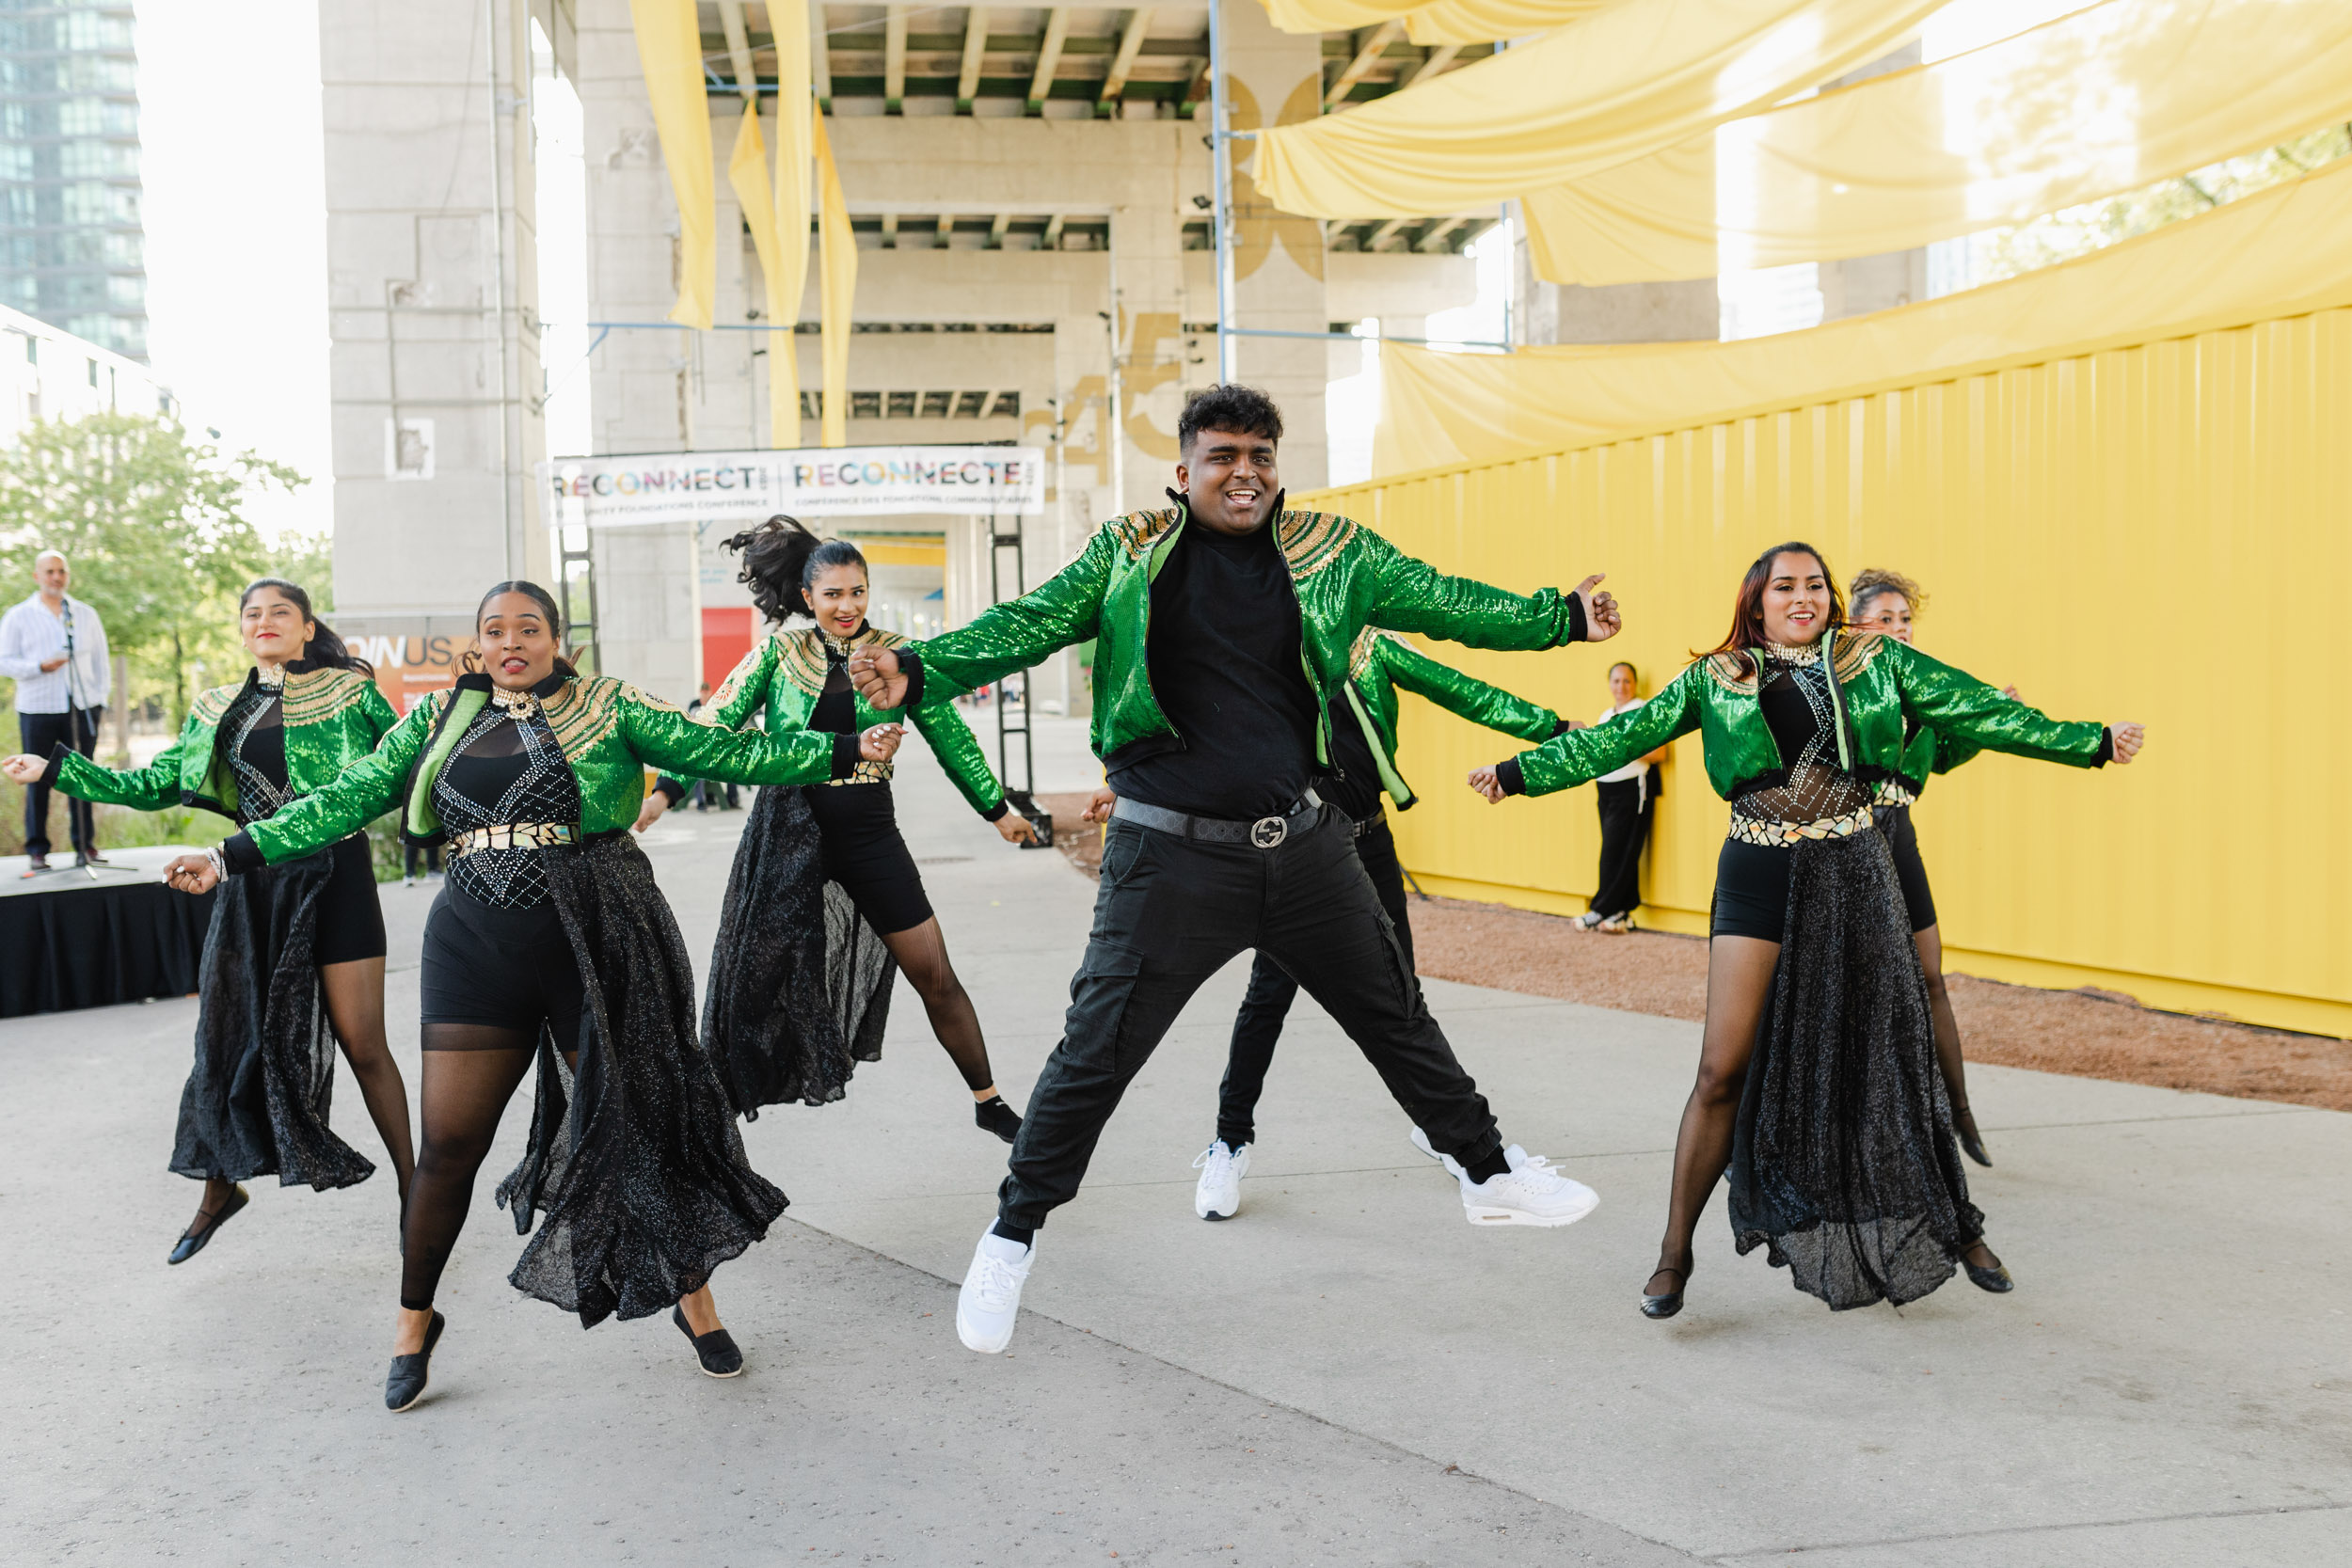 Conference Photography: A group of dancers in green jackets performing in front of a vibrant yellow building.